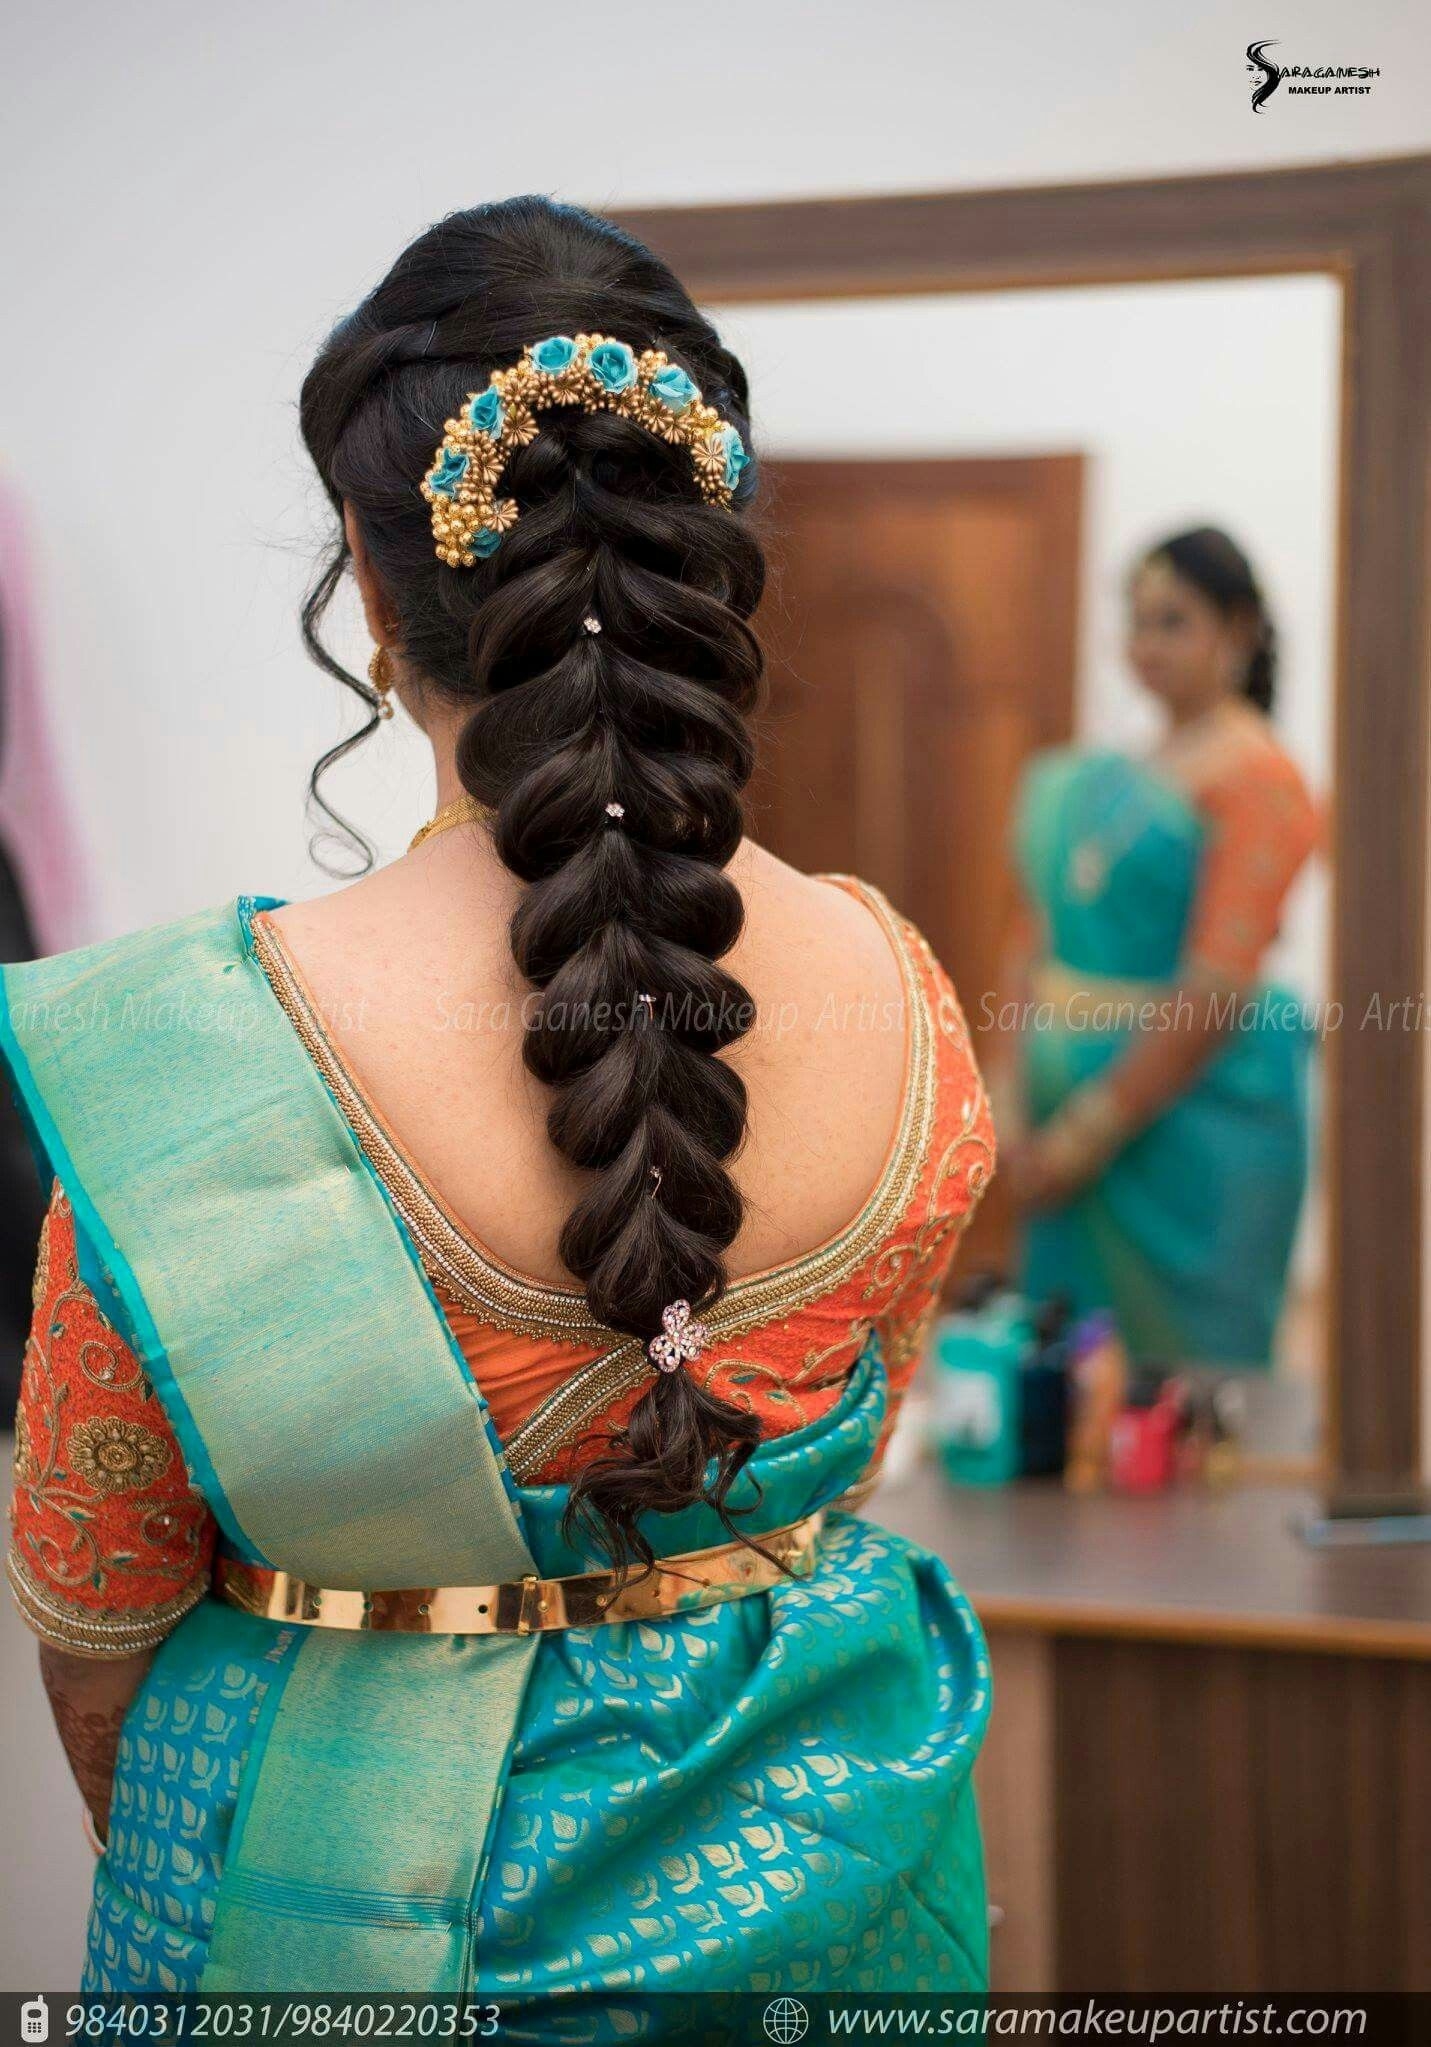 Hair Do | Hair Do | Indian Bridal Hairstyles, Indian Wedding pertaining to The greatest South Asian Wedding Hairstyles